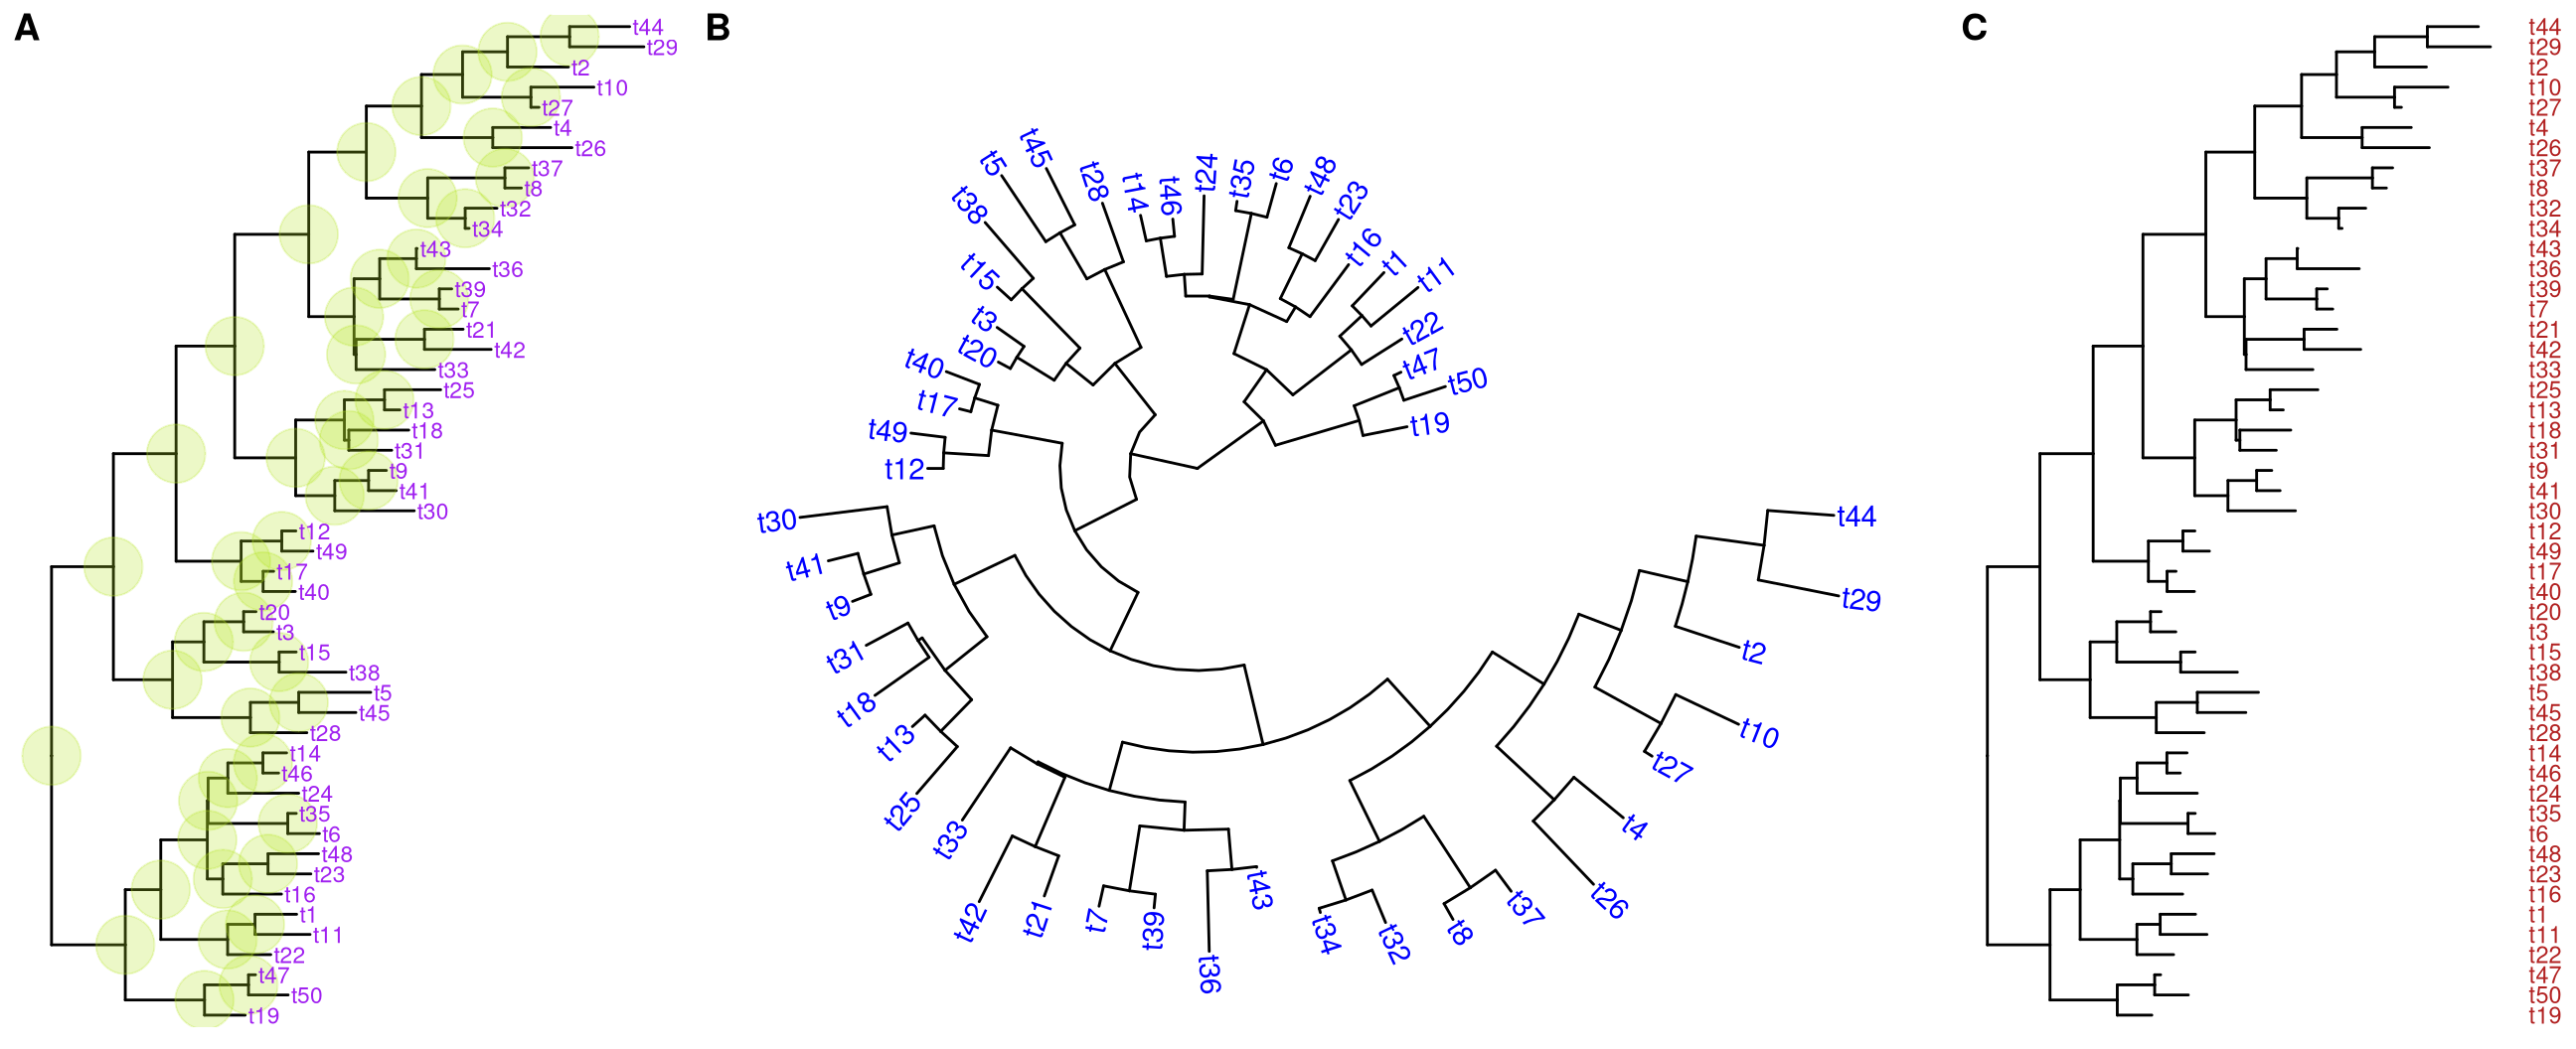 Display tip labels. geom_tiplab supports displaying tip labels (A). For circular, fan or unrooted tree layout, the labels can be rotated to fit the angle of the branches (B). For dendrogram/rectangular layout, tip labels can be displayed as y-axis label (C).